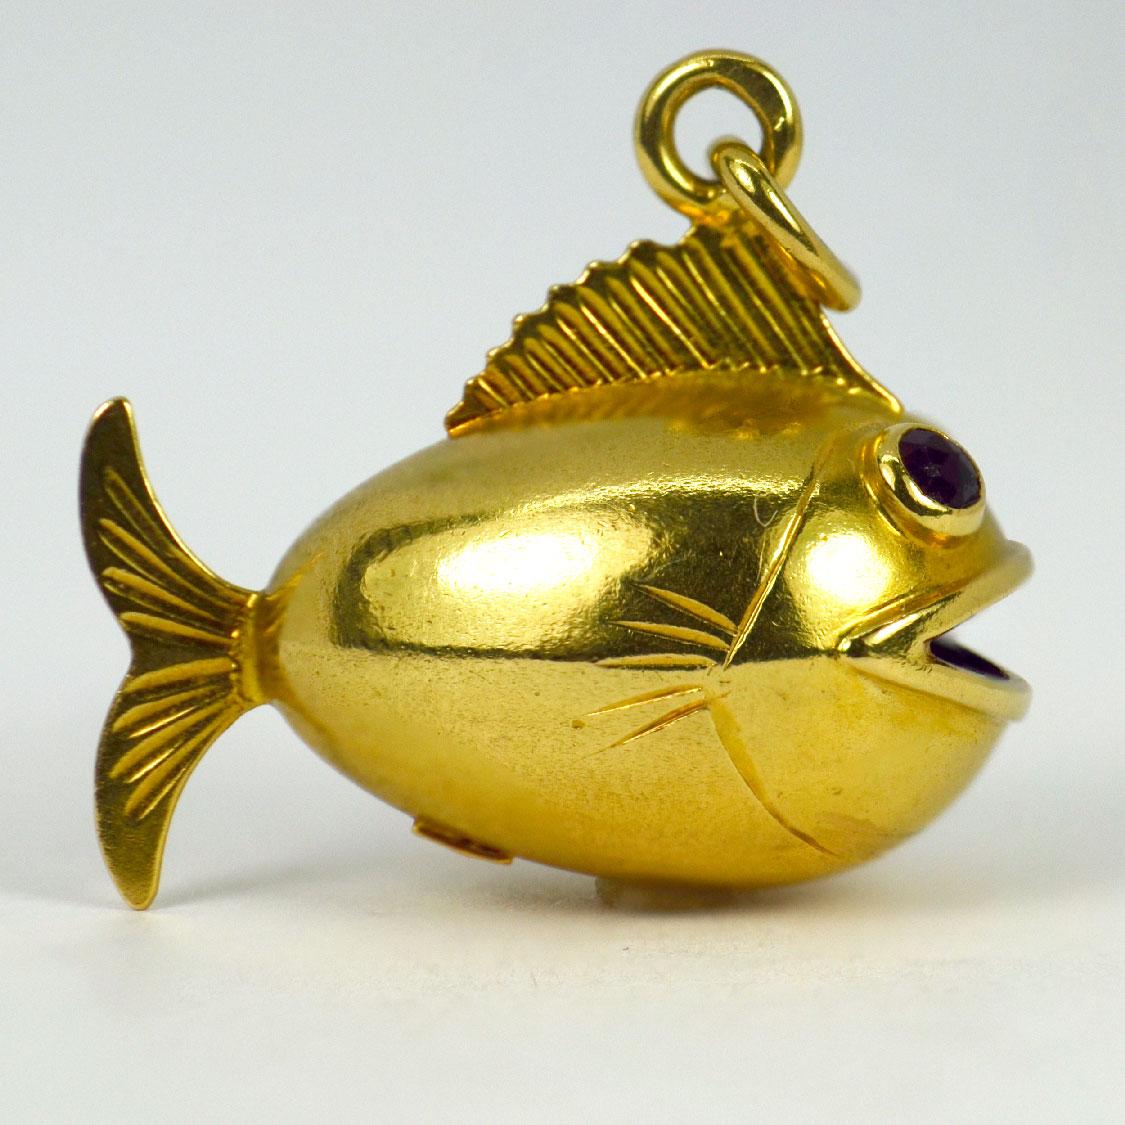 An 18 karat (18K) yellow gold charm pendant designed as a fish with faceted red paste eyes. Stamped with the owl mark for French import and 18 karat gold, and marked 750 and JDB (unknown maker) to a plaque.

Dimensions: 1.9 x 2.1 x 1.2 cm (not